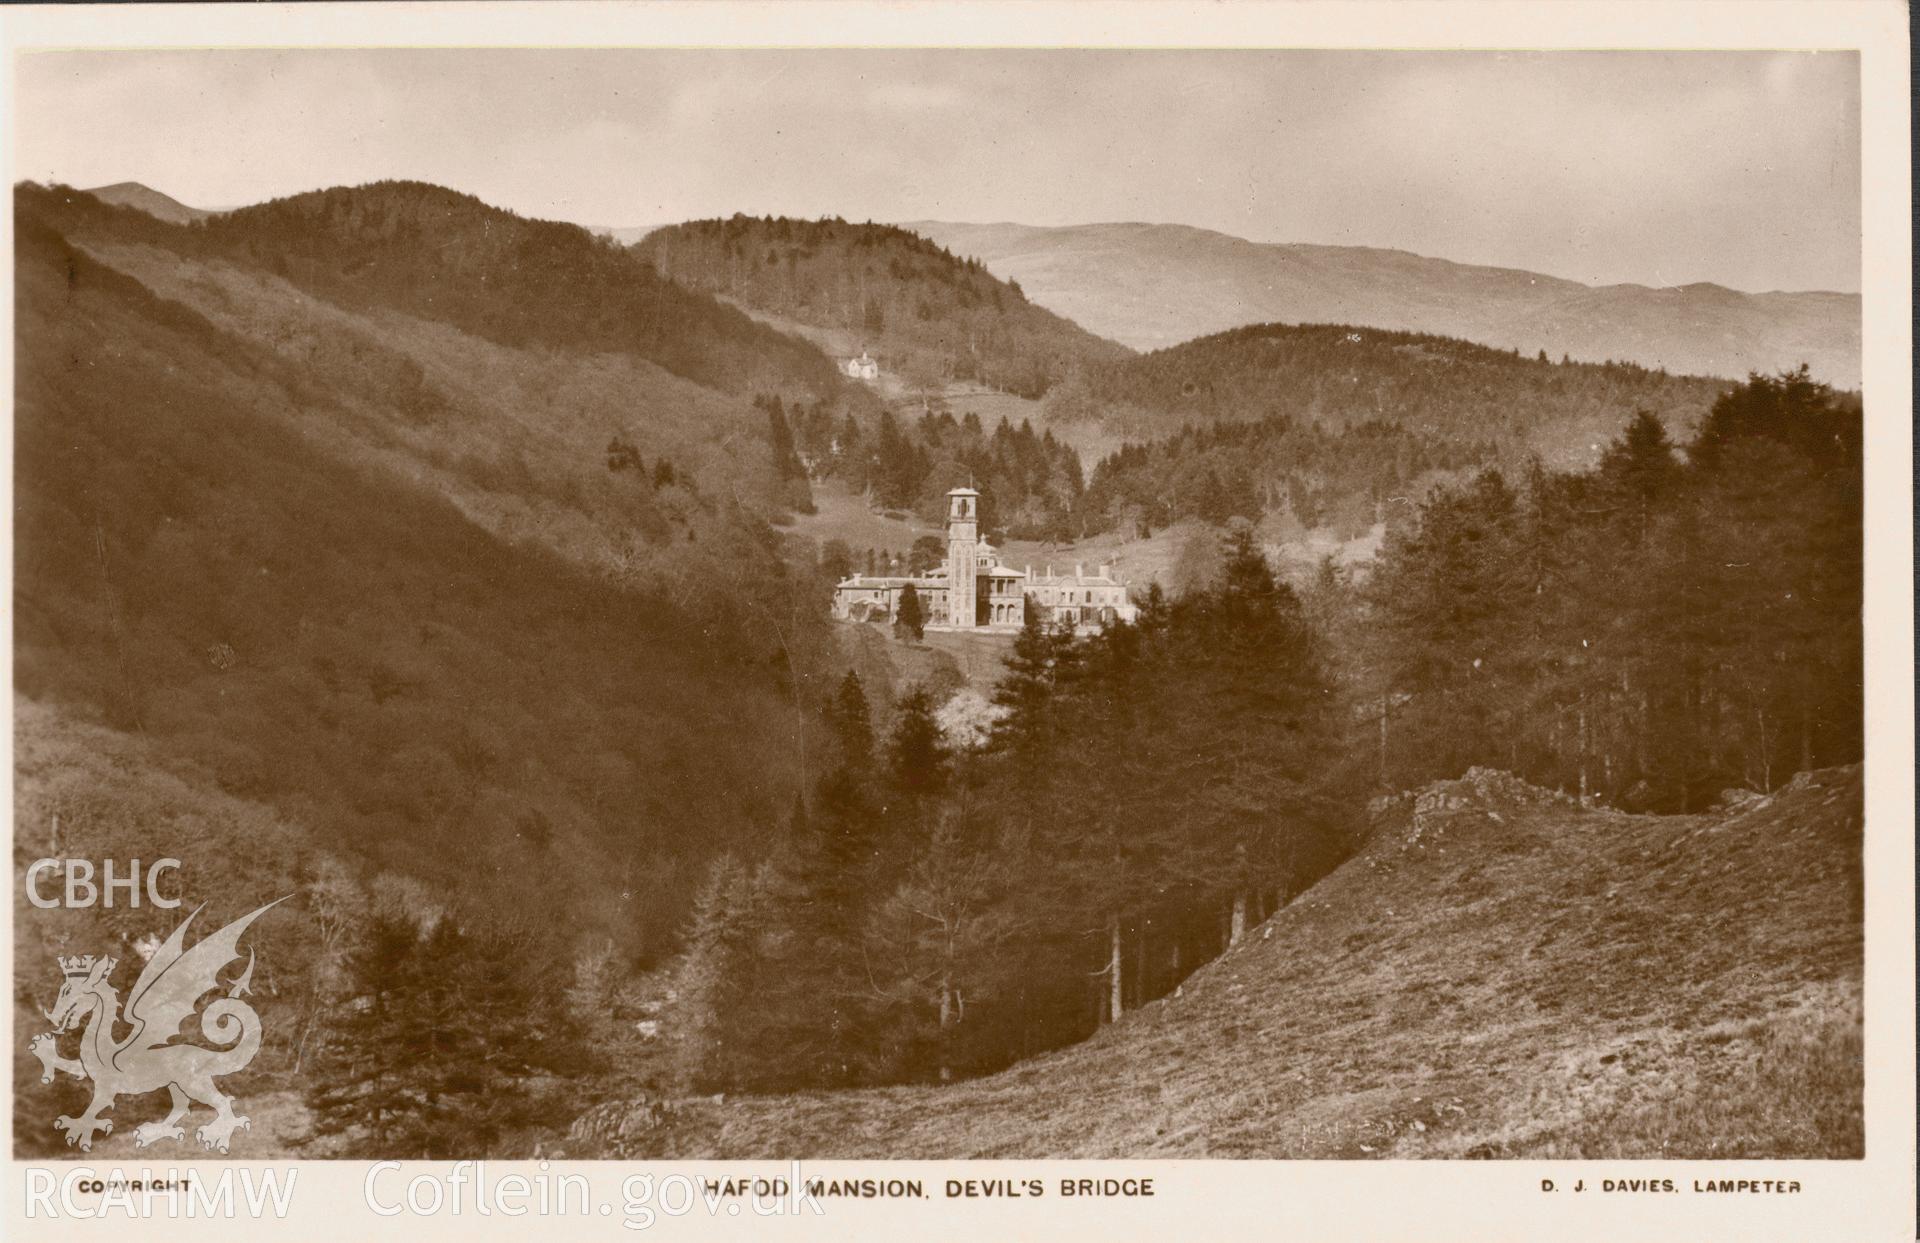 Digitised postcard image of Hafod Uchtryd mansion, D.J. Davies, Lampeter. Produced by Parks and Gardens Data Services, from an original item in the Peter Davis Collection at Parks and Gardens UK. We hold only web-resolution images of this collection, suitable for viewing on screen and for research purposes only. We do not hold the original images, or publication quality scans.